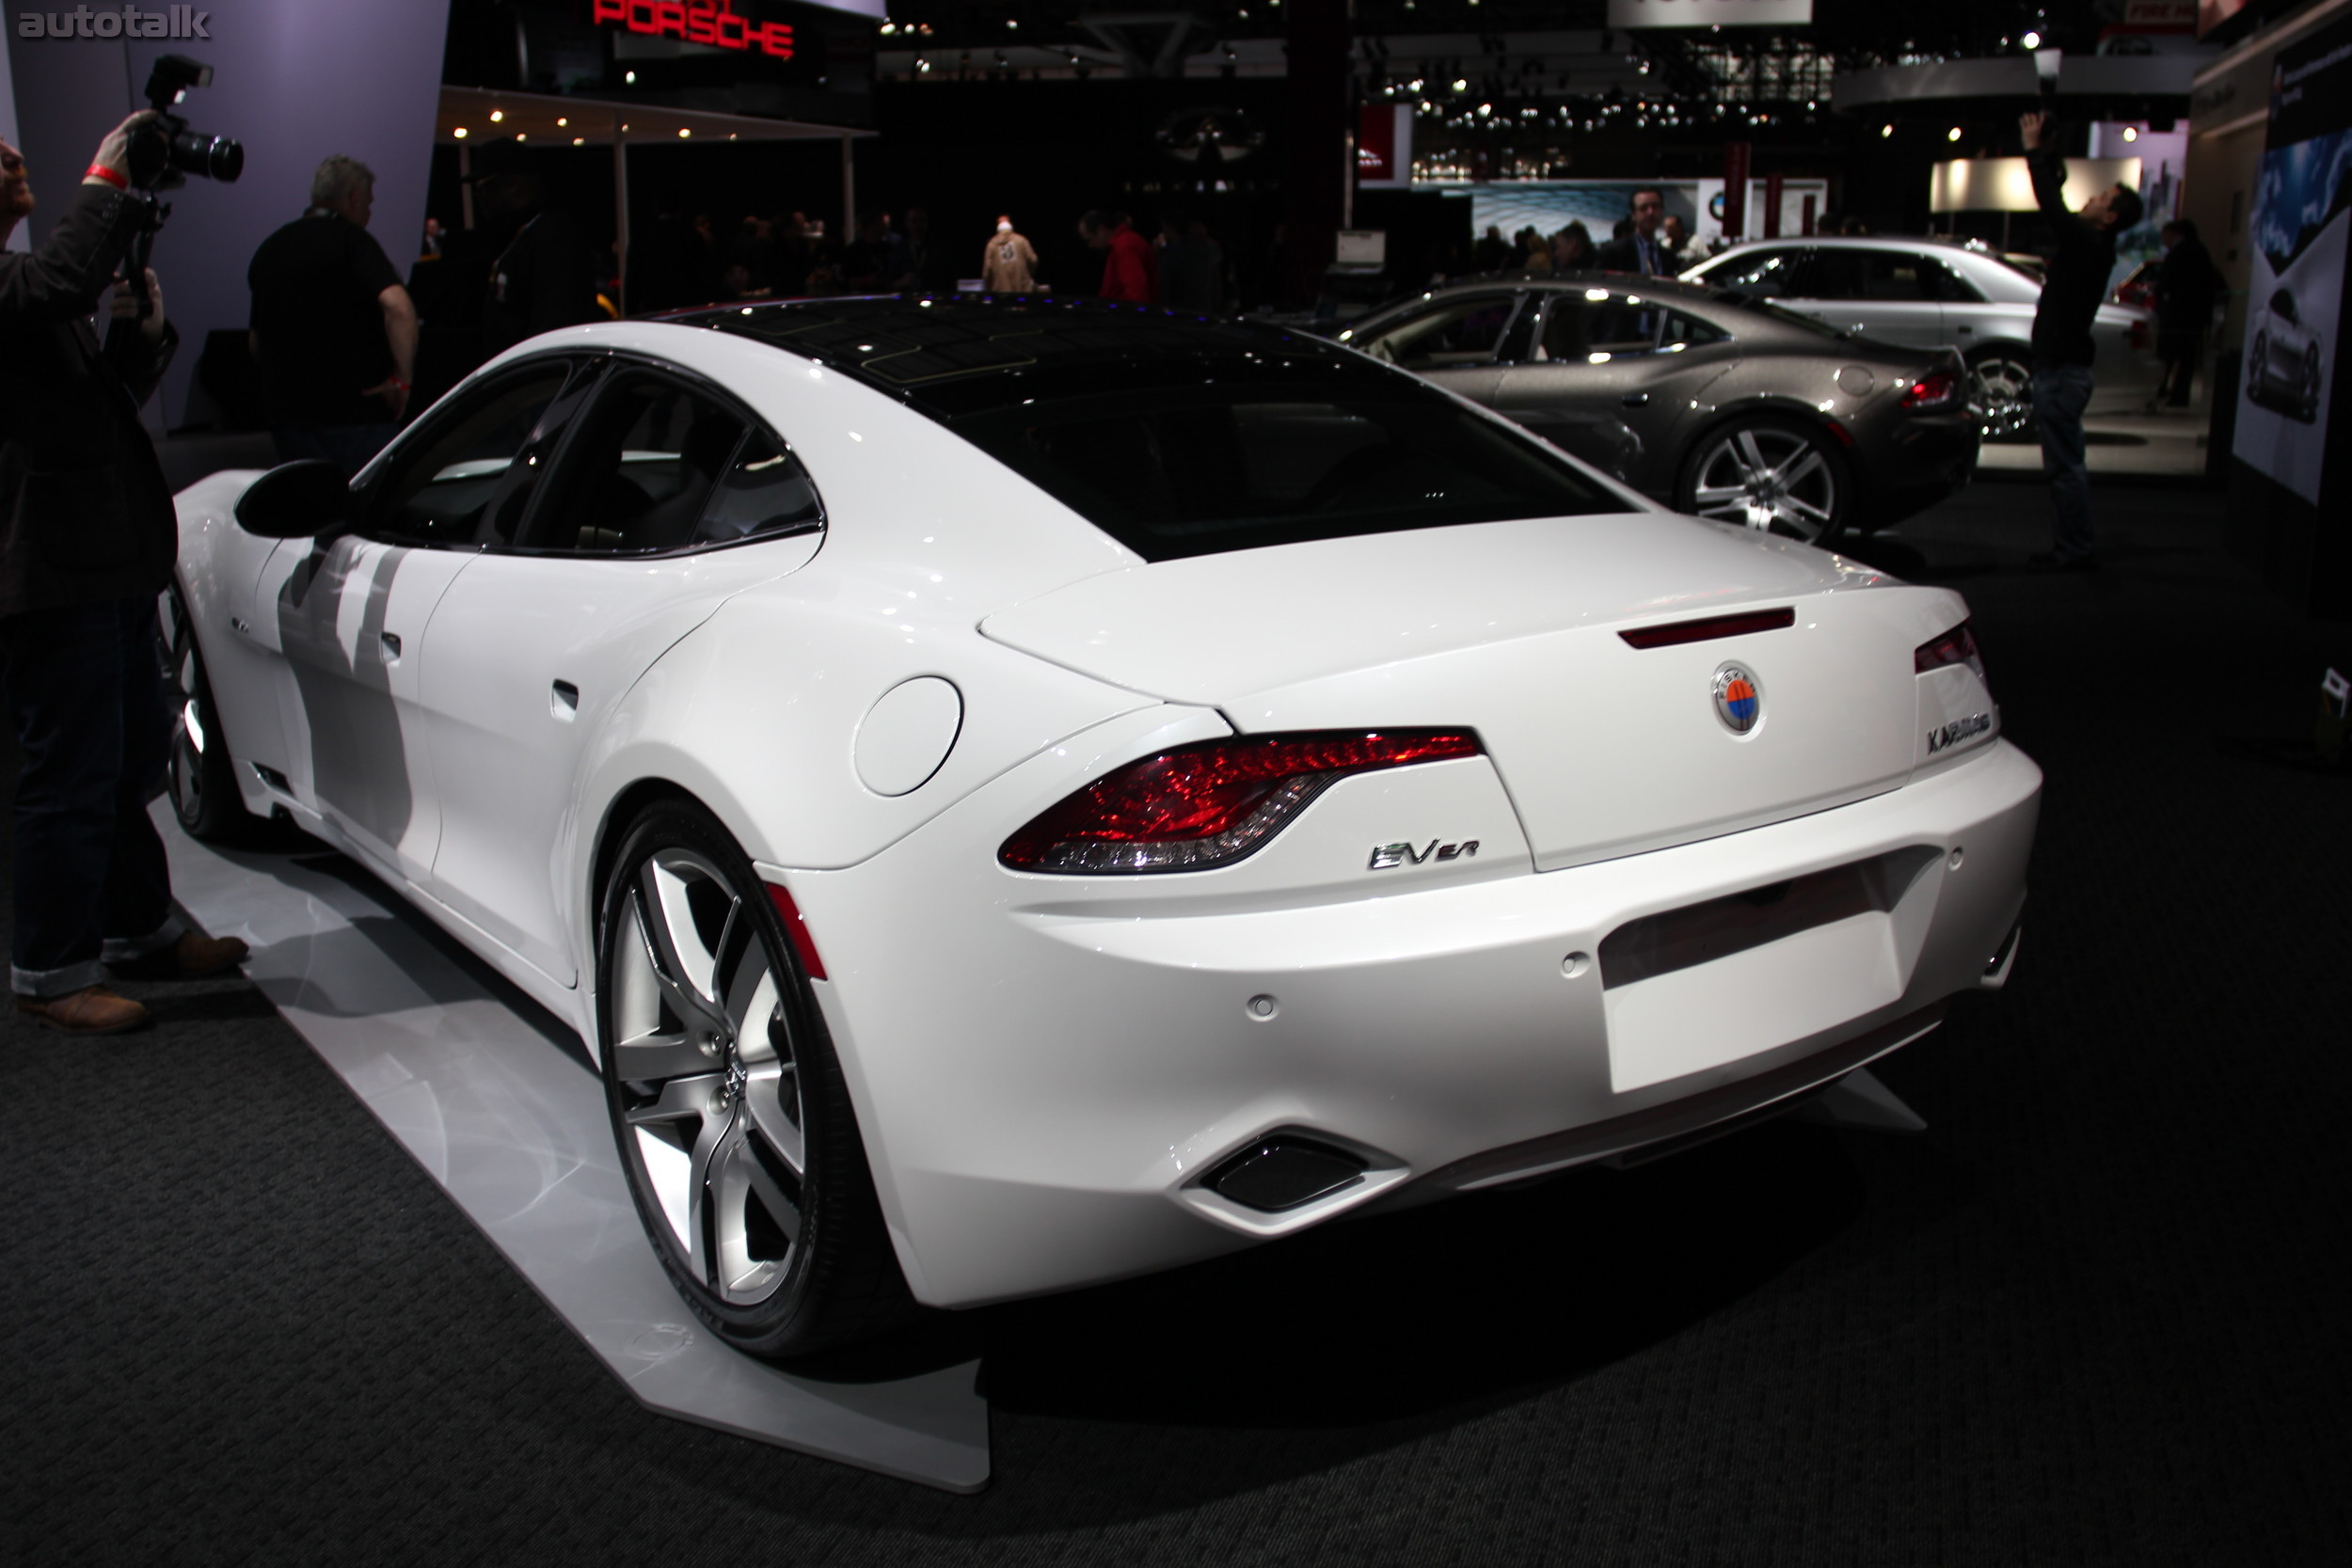 Fisker Booth NYIAS 2012